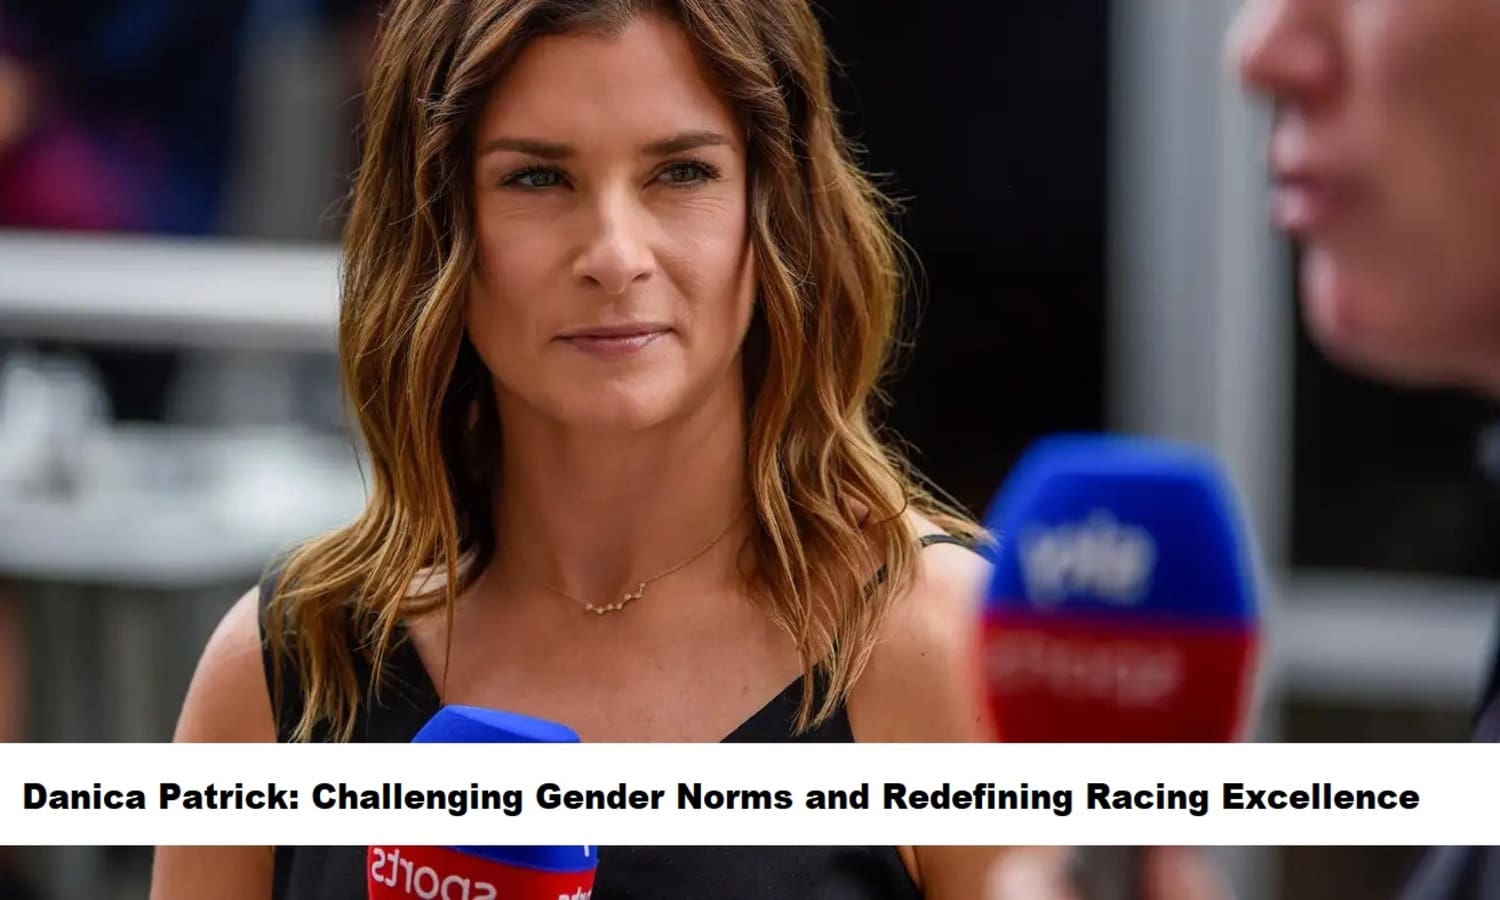 danica-patrick-challenging-gender-norms-and-redefining-racing-excellence